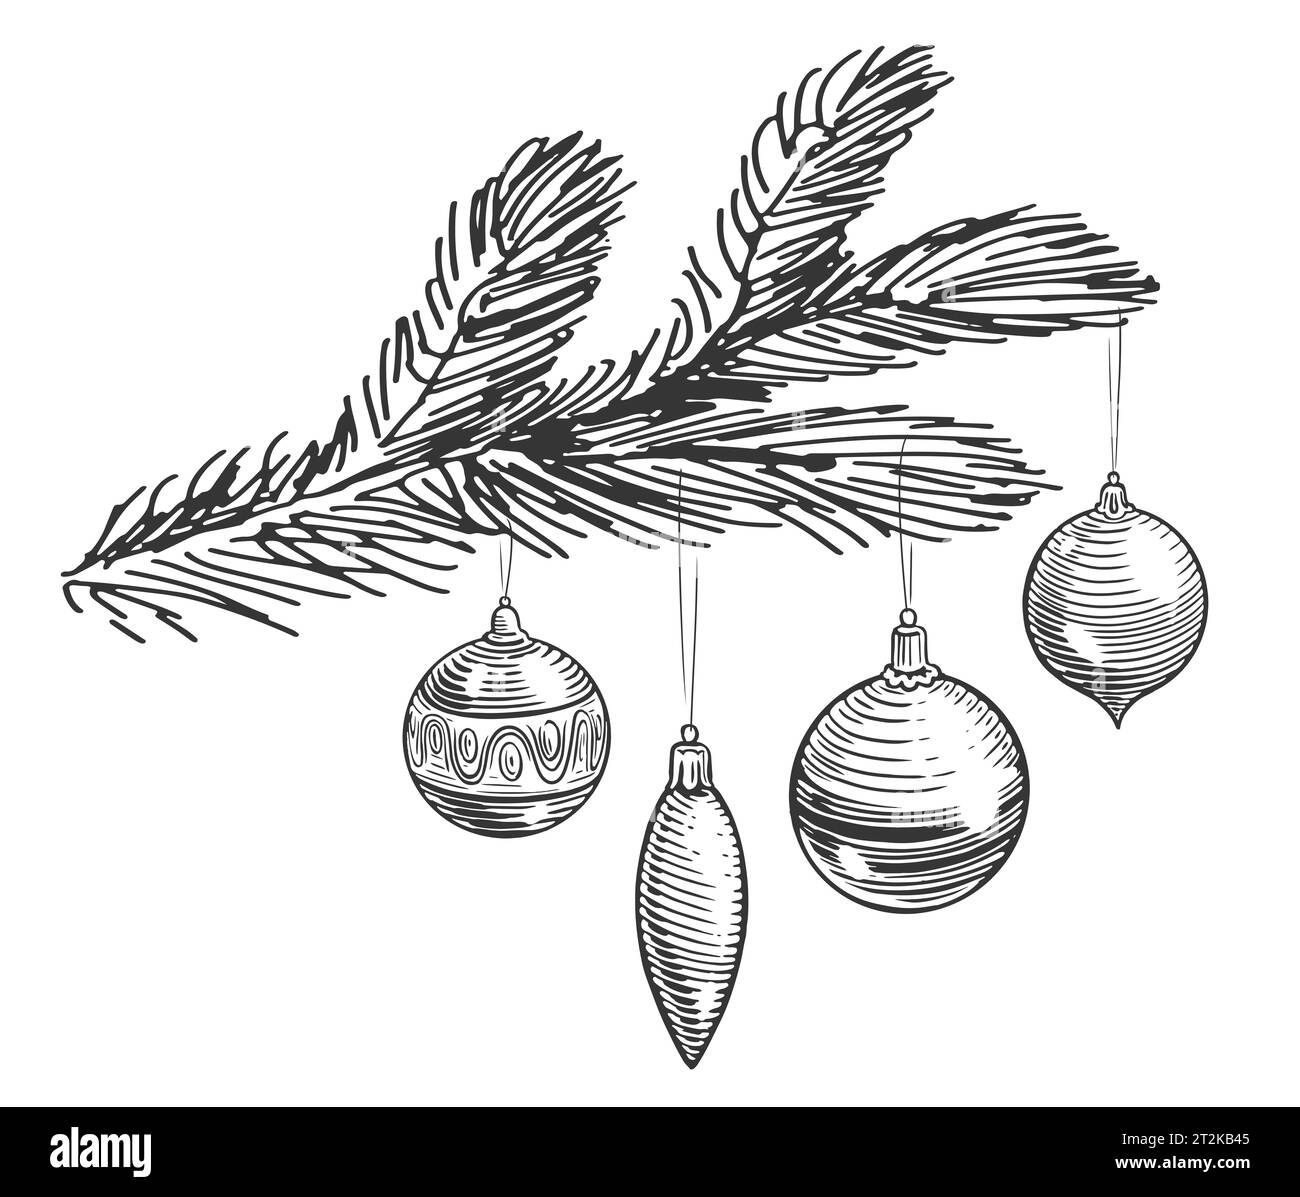 Decoration balls on fir tree branch. Merry Christmas and Happy New Year. Hand drawn illustration in sketch style Stock Photo